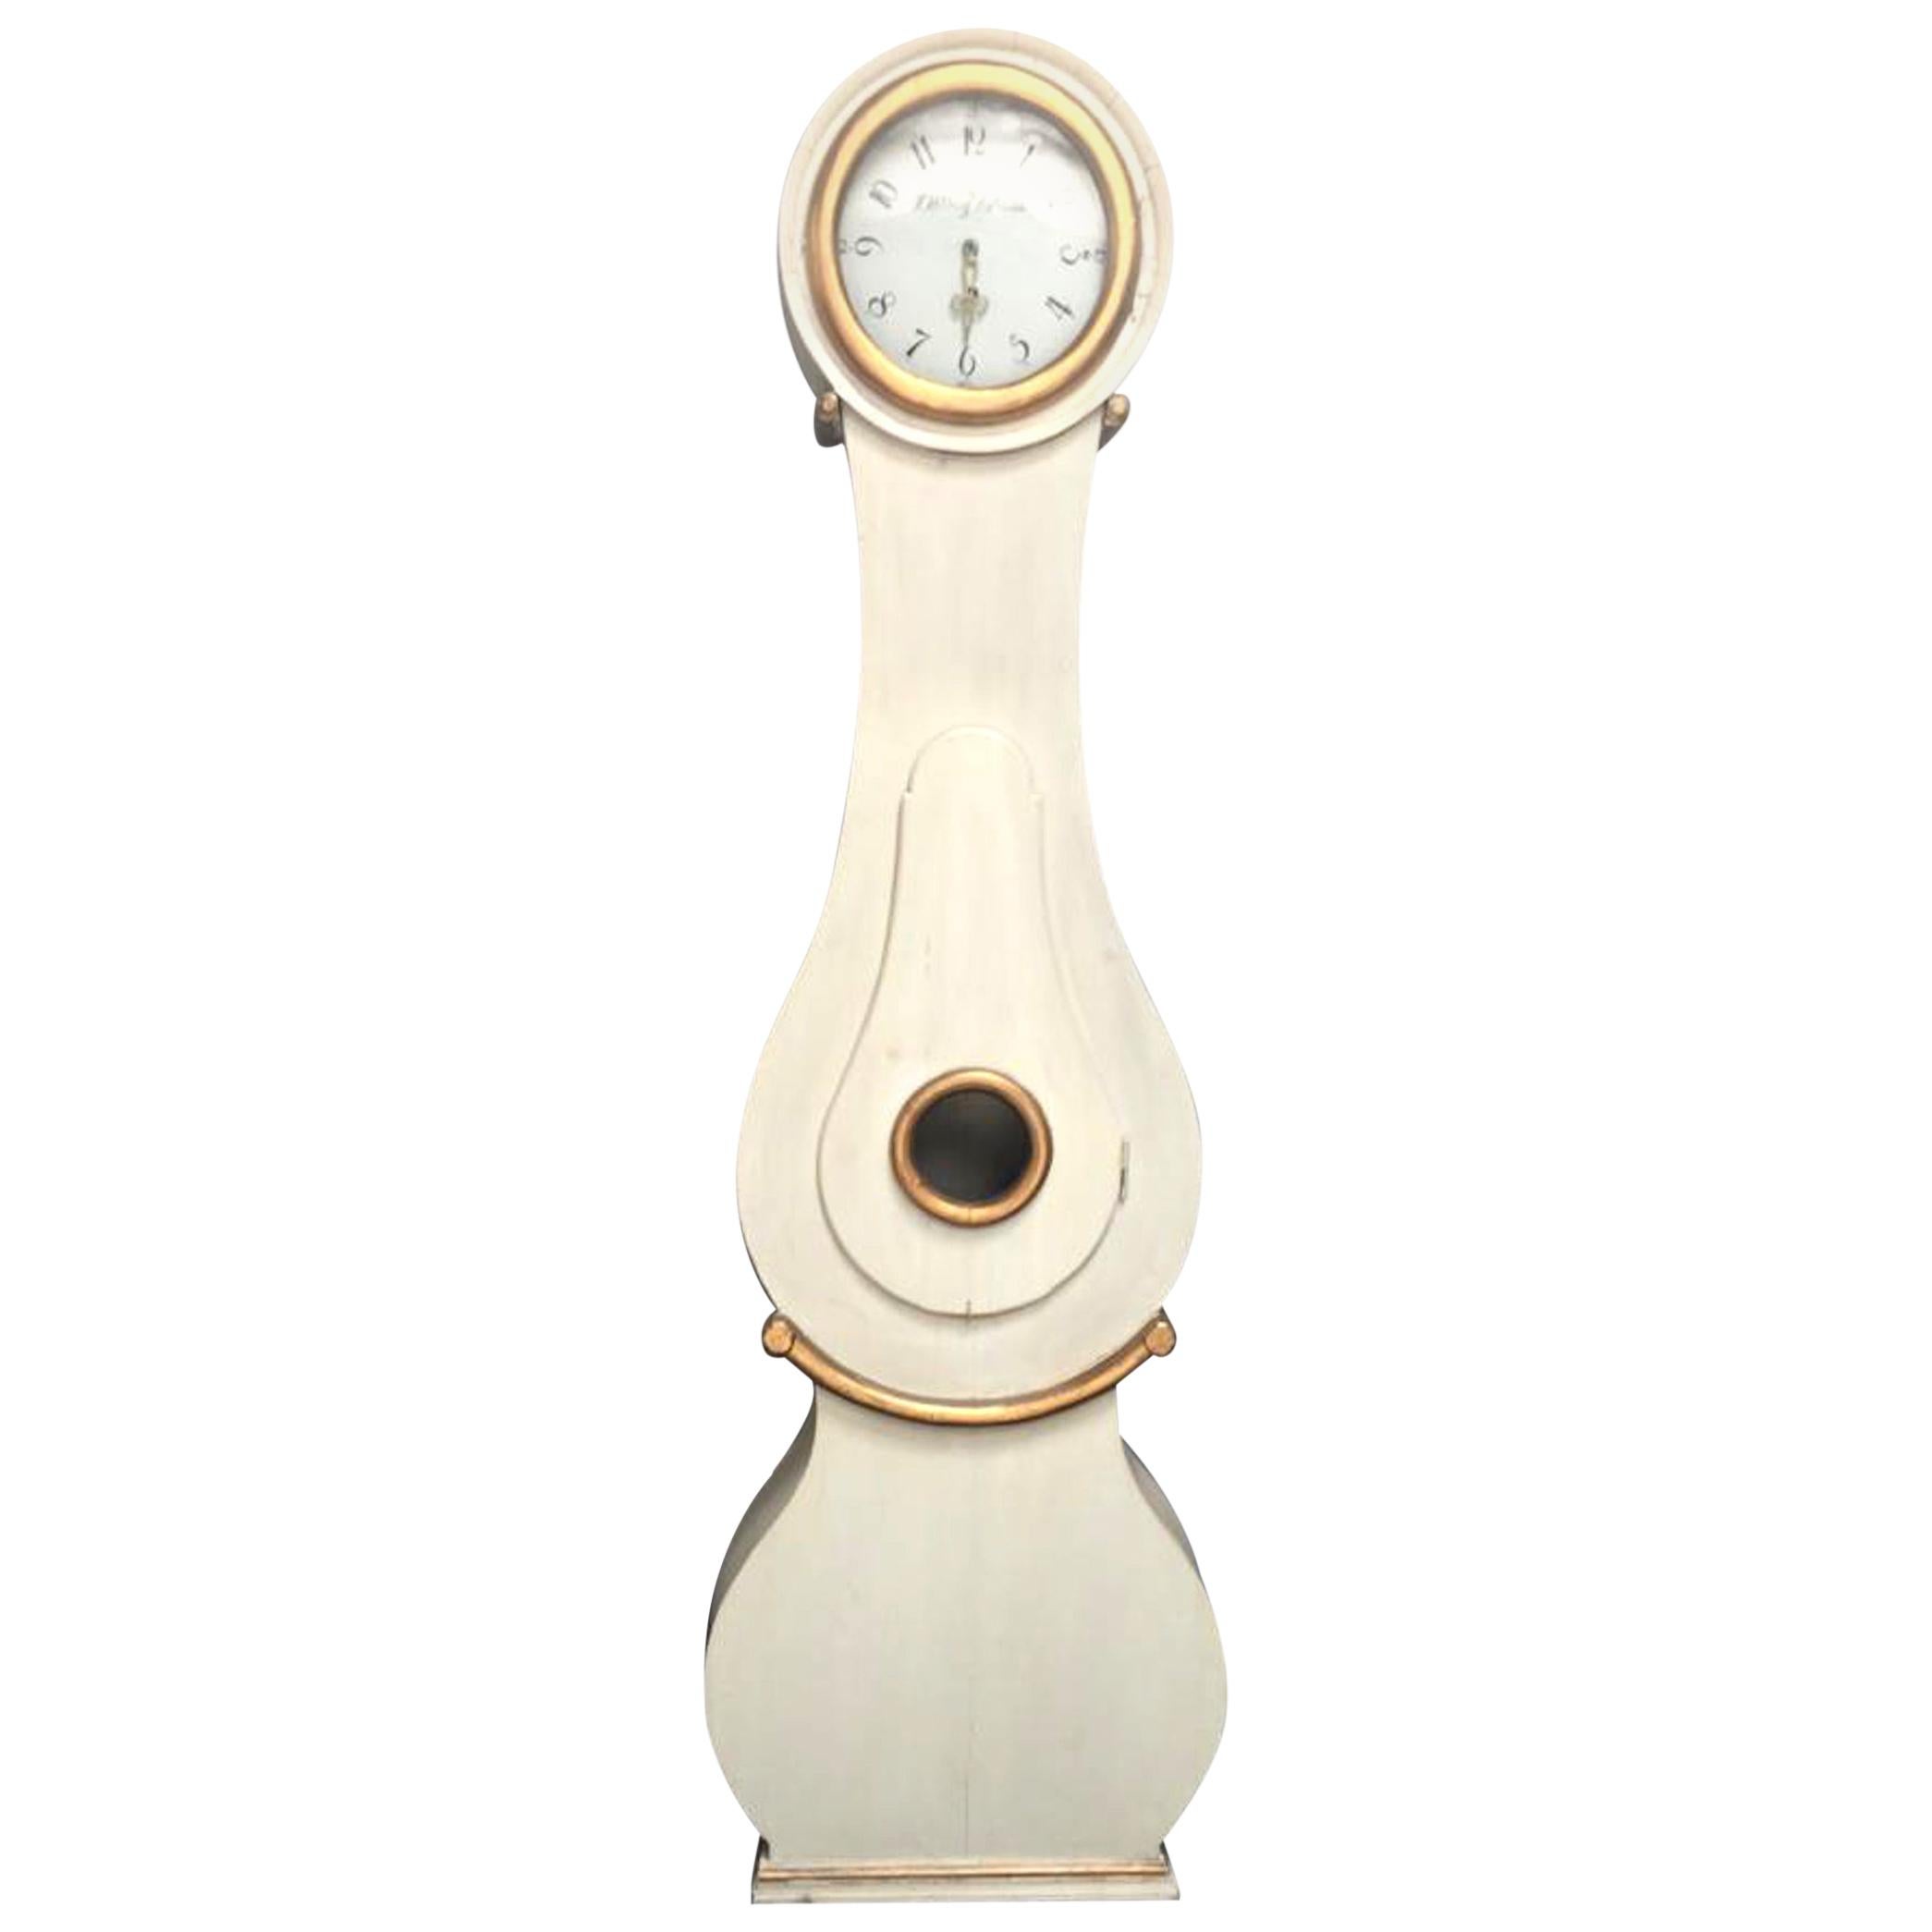 Mora Clock Swedish Antique Fryksdall White Painted, Early 1800s, Gustavian